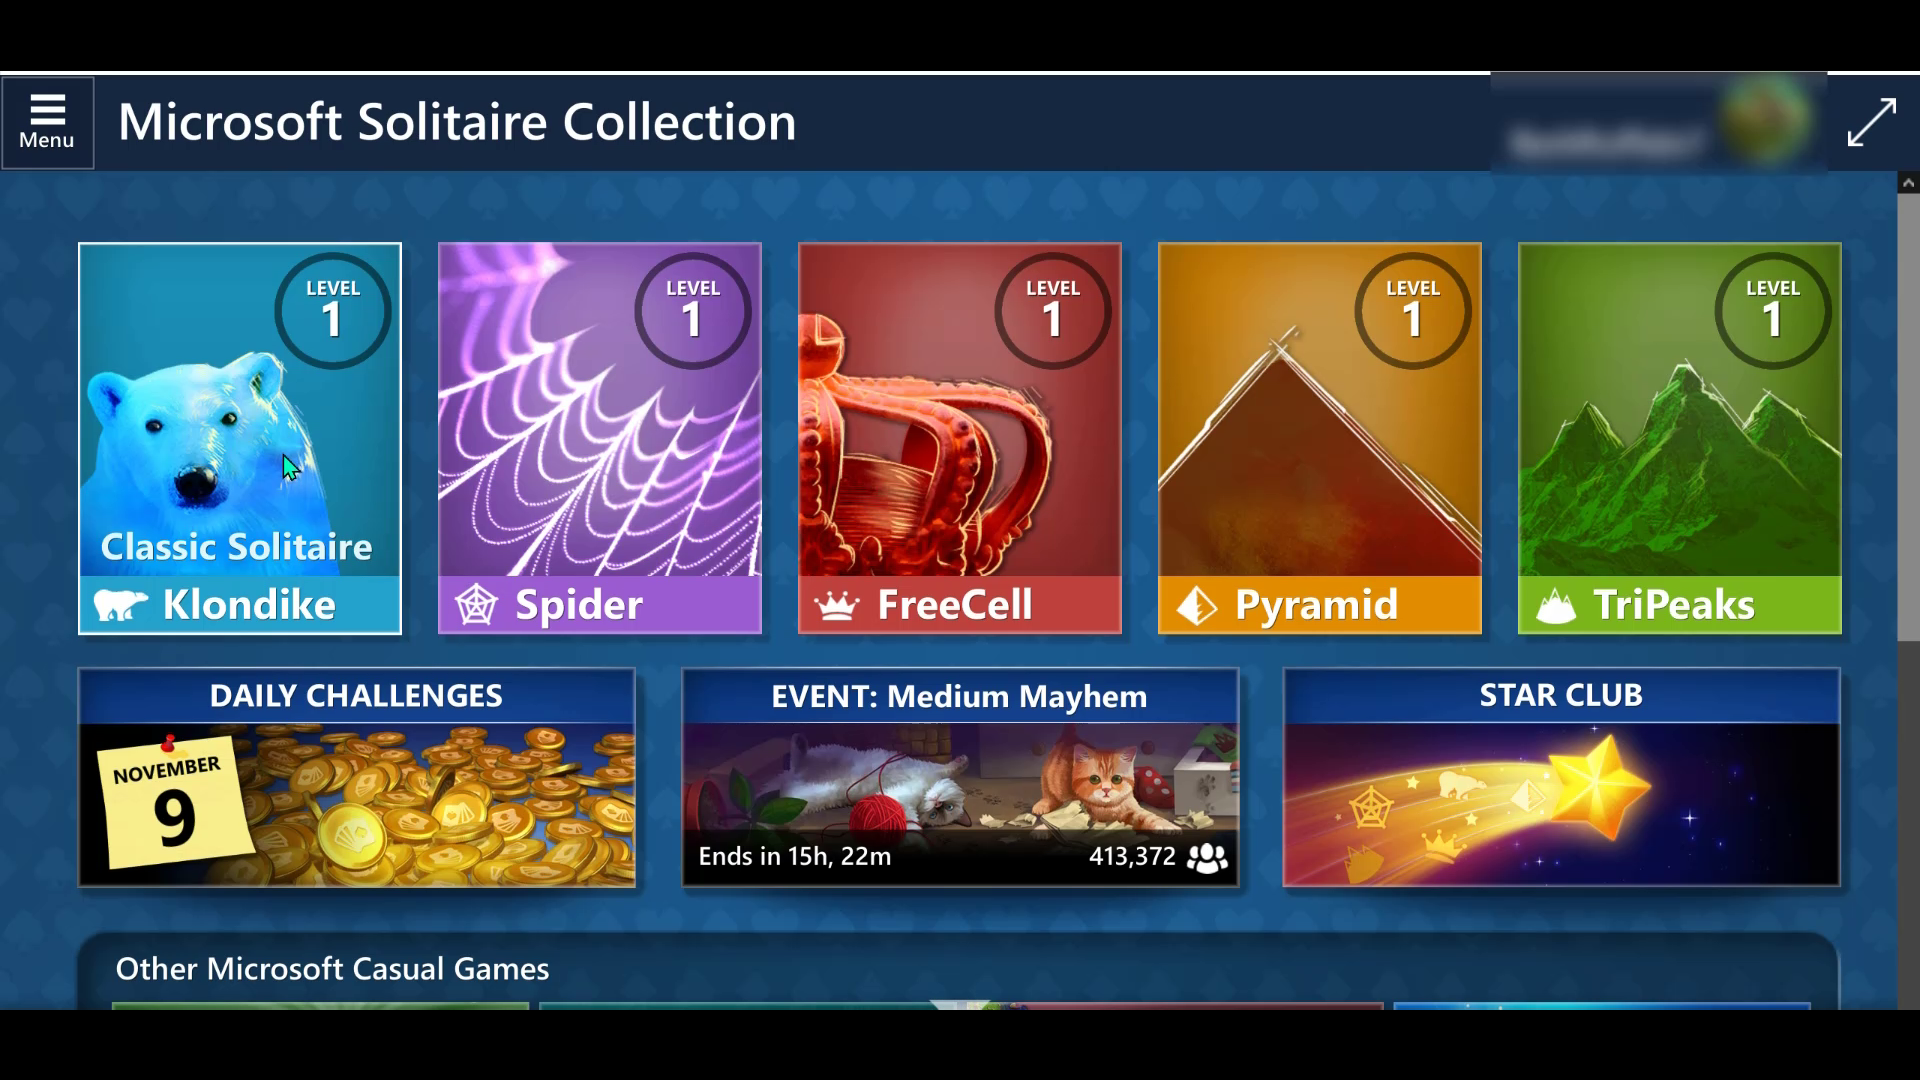 download xbox files so i can sign into microsoft solitaire collection